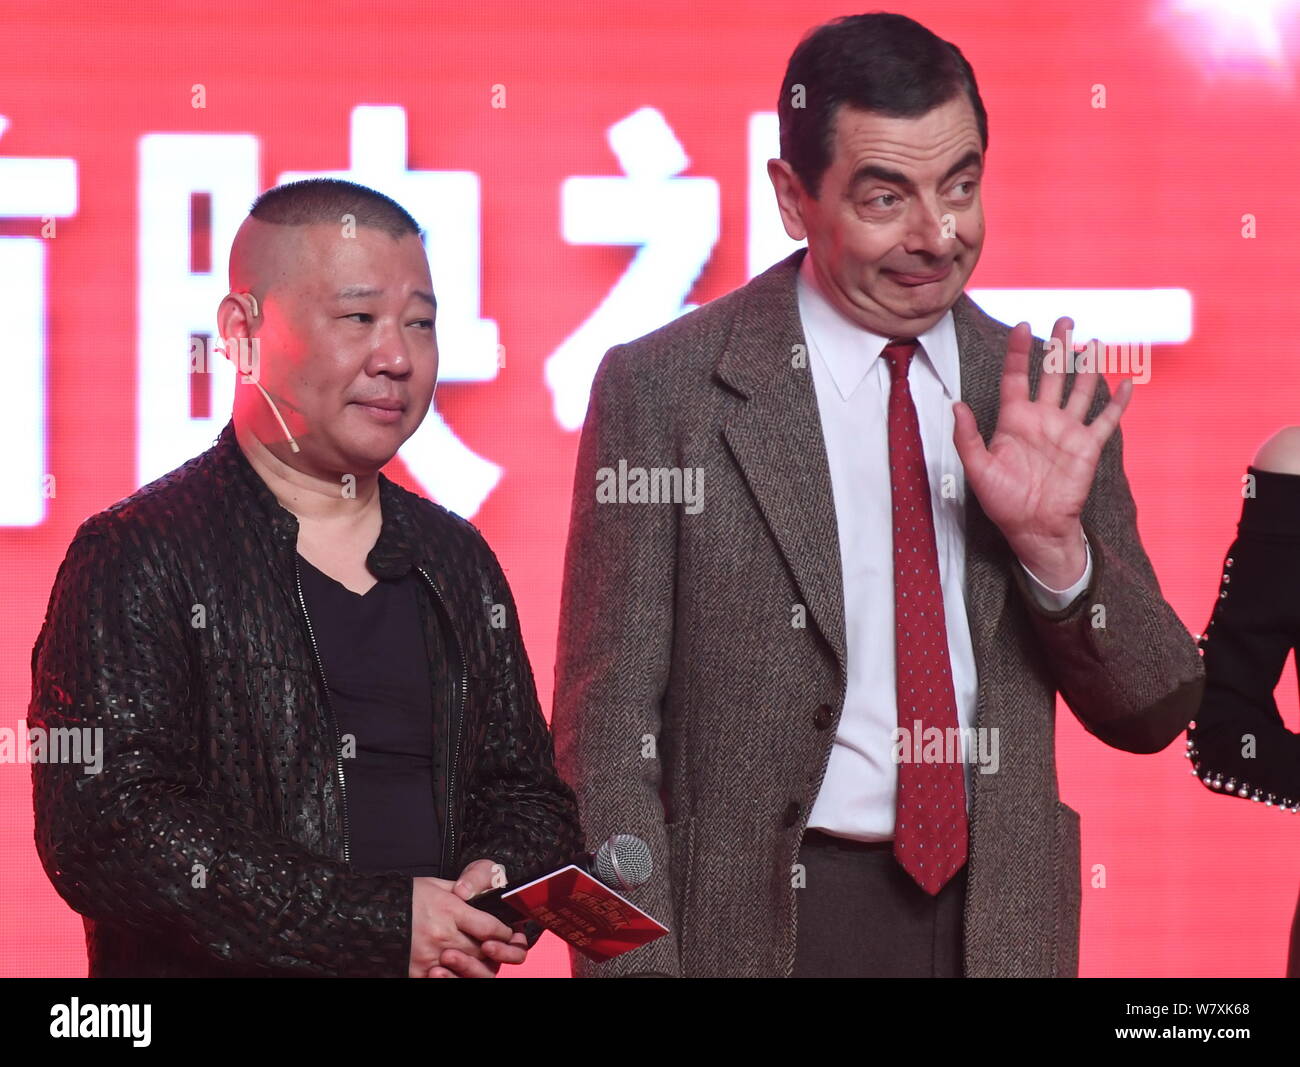 English actor Rowan Atkinson playing Mr. Bean, right, and Chinese comedian  Guo Degang attend a premiere for their movie 